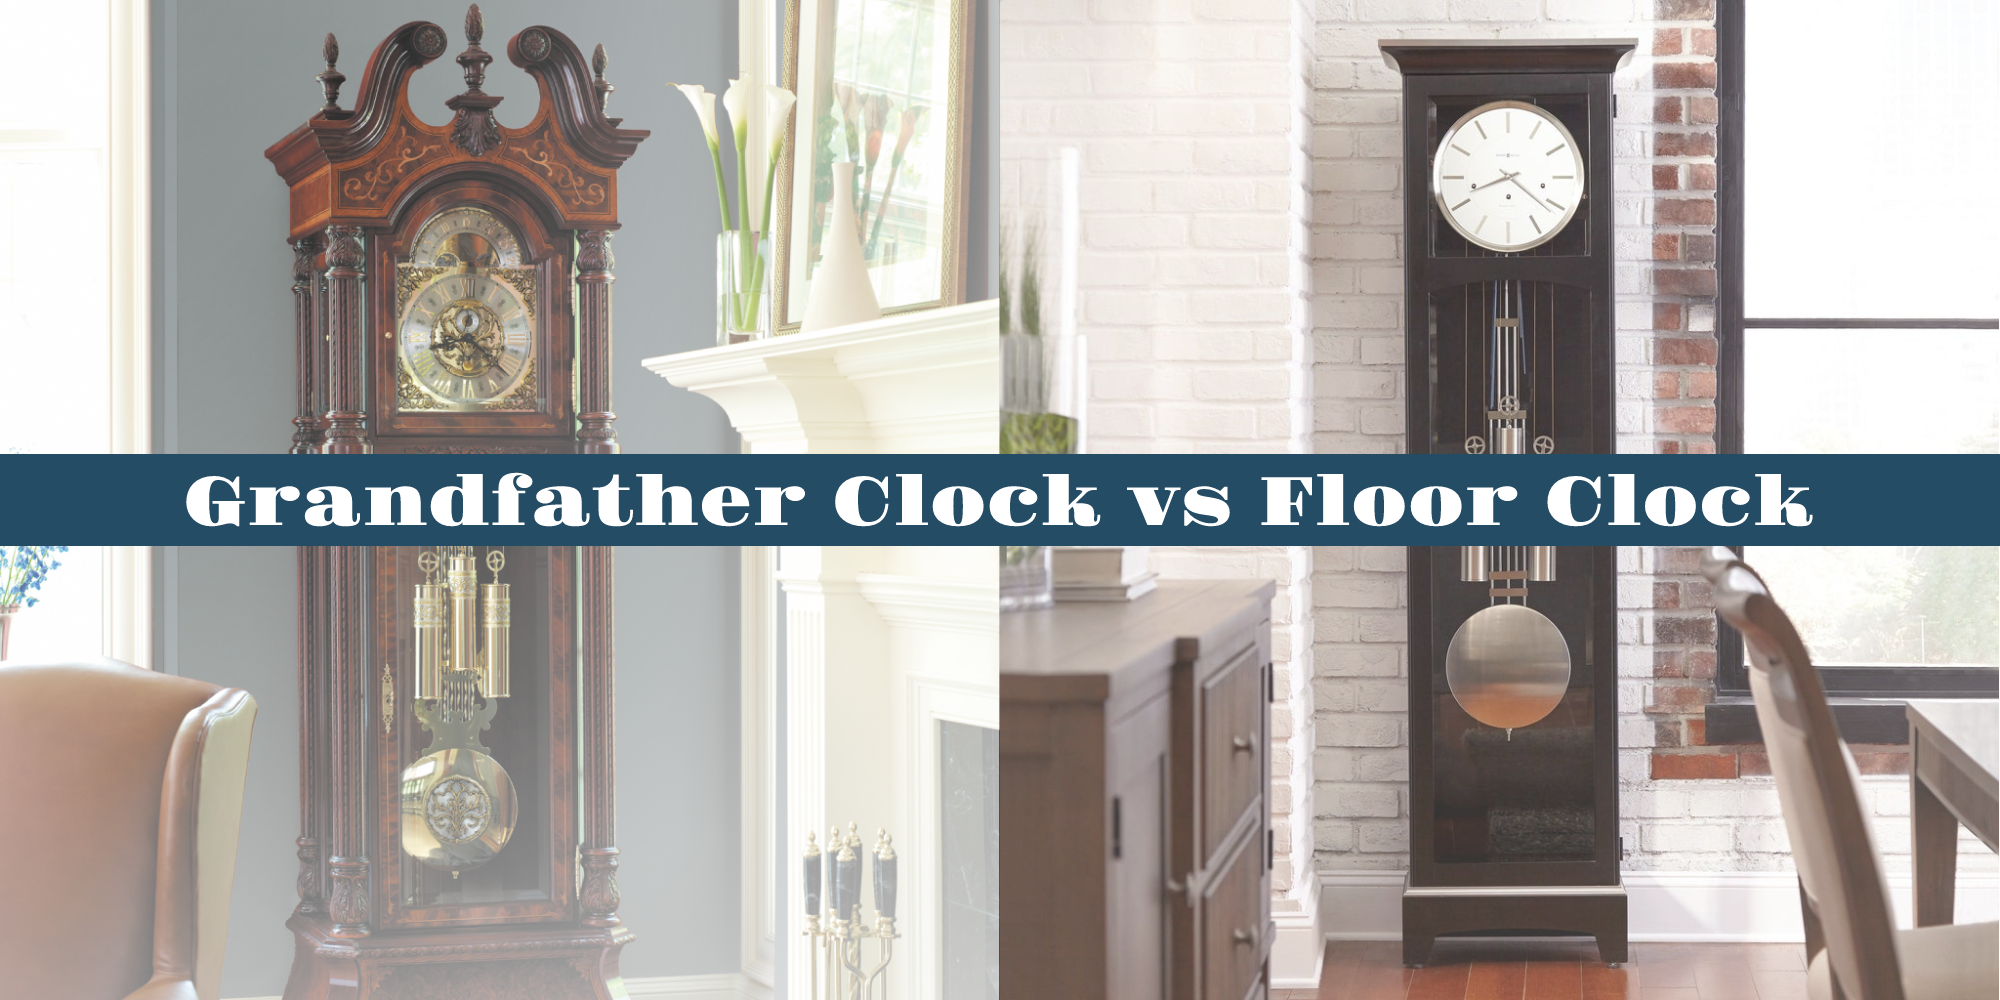 What is the difference between Grandfather Clocks and Floor Clocks?